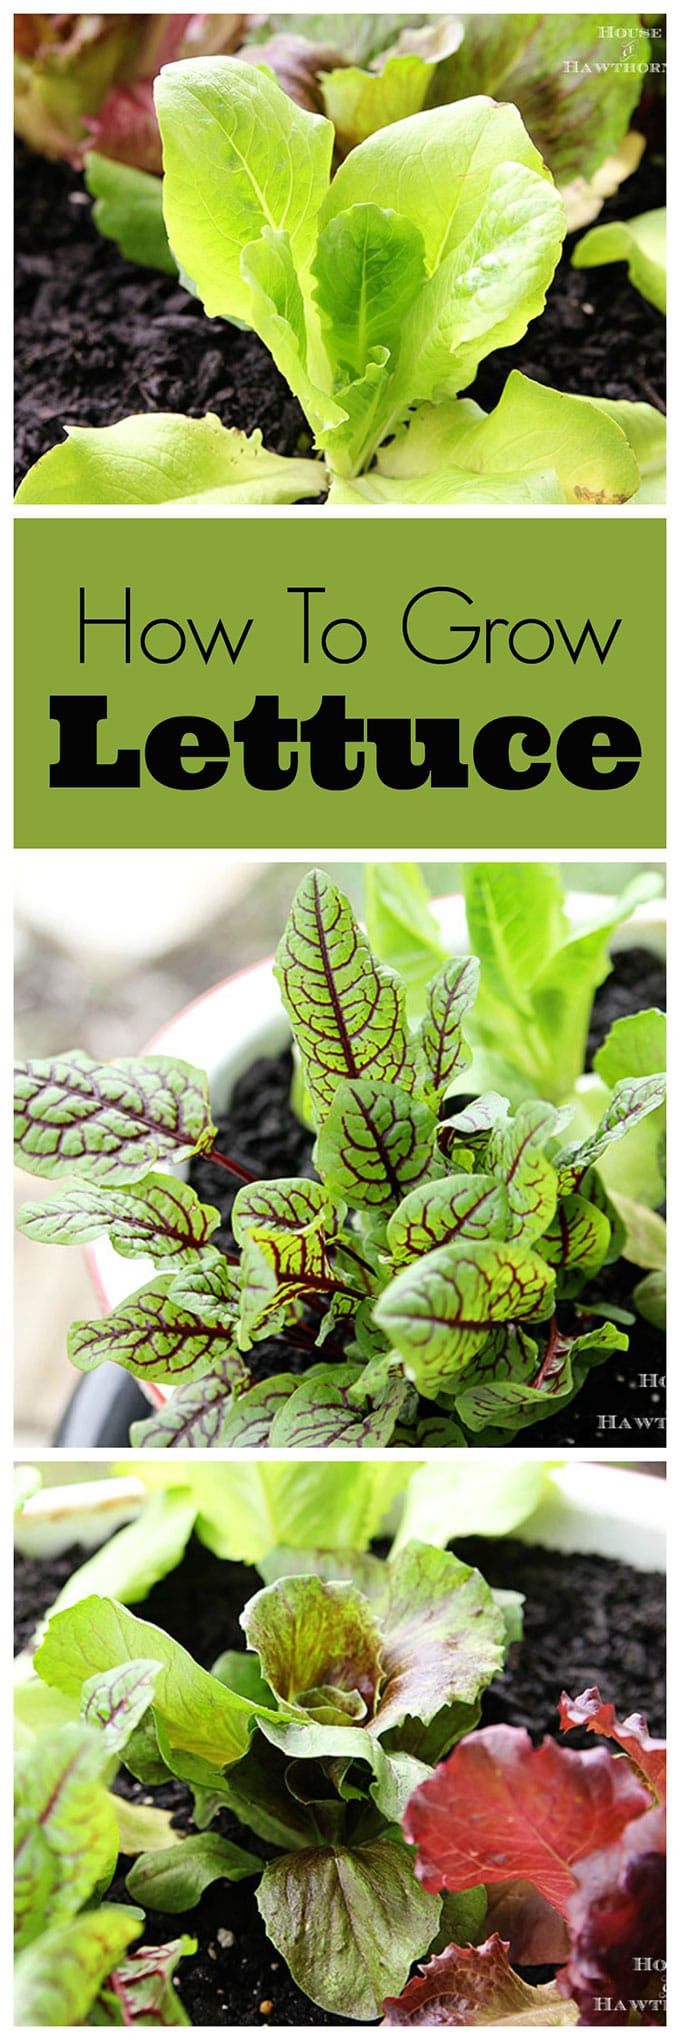 Tips on growing lettuce. In a container or in the ground, it's always an easy and yummy vegetable to grow yourself!